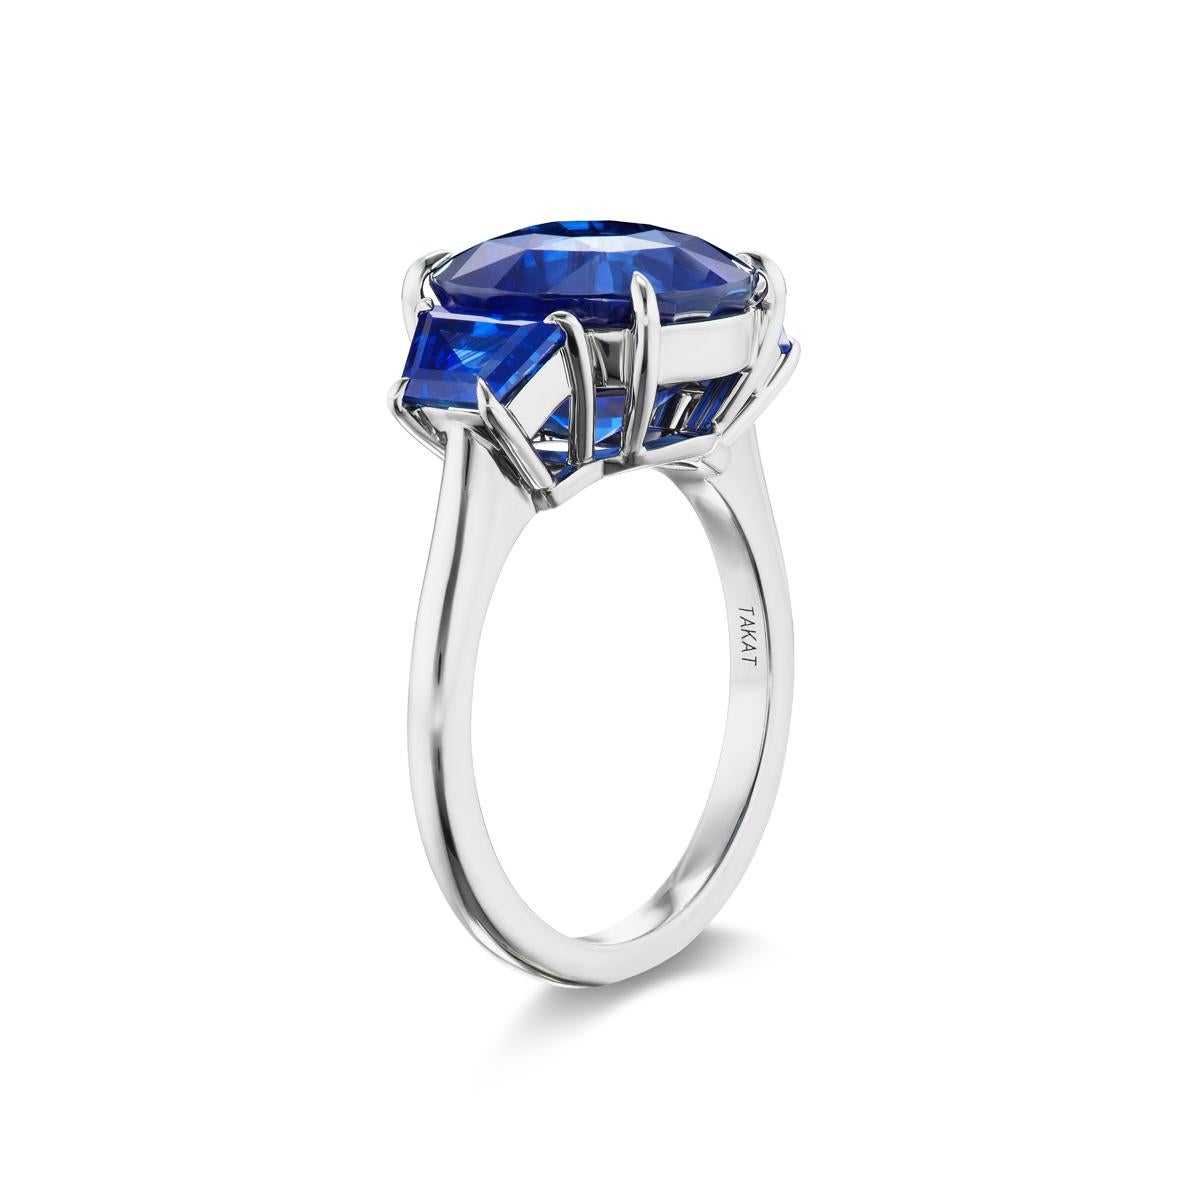 This ring features a 3-stone setting with a Blue Sapphire as the center piece, the shoulders of this ring are adorned with trapezoid cut deep blue sapphires. An equally gorgeous solitaire band completes this classic Sapphire ring in an 18k White